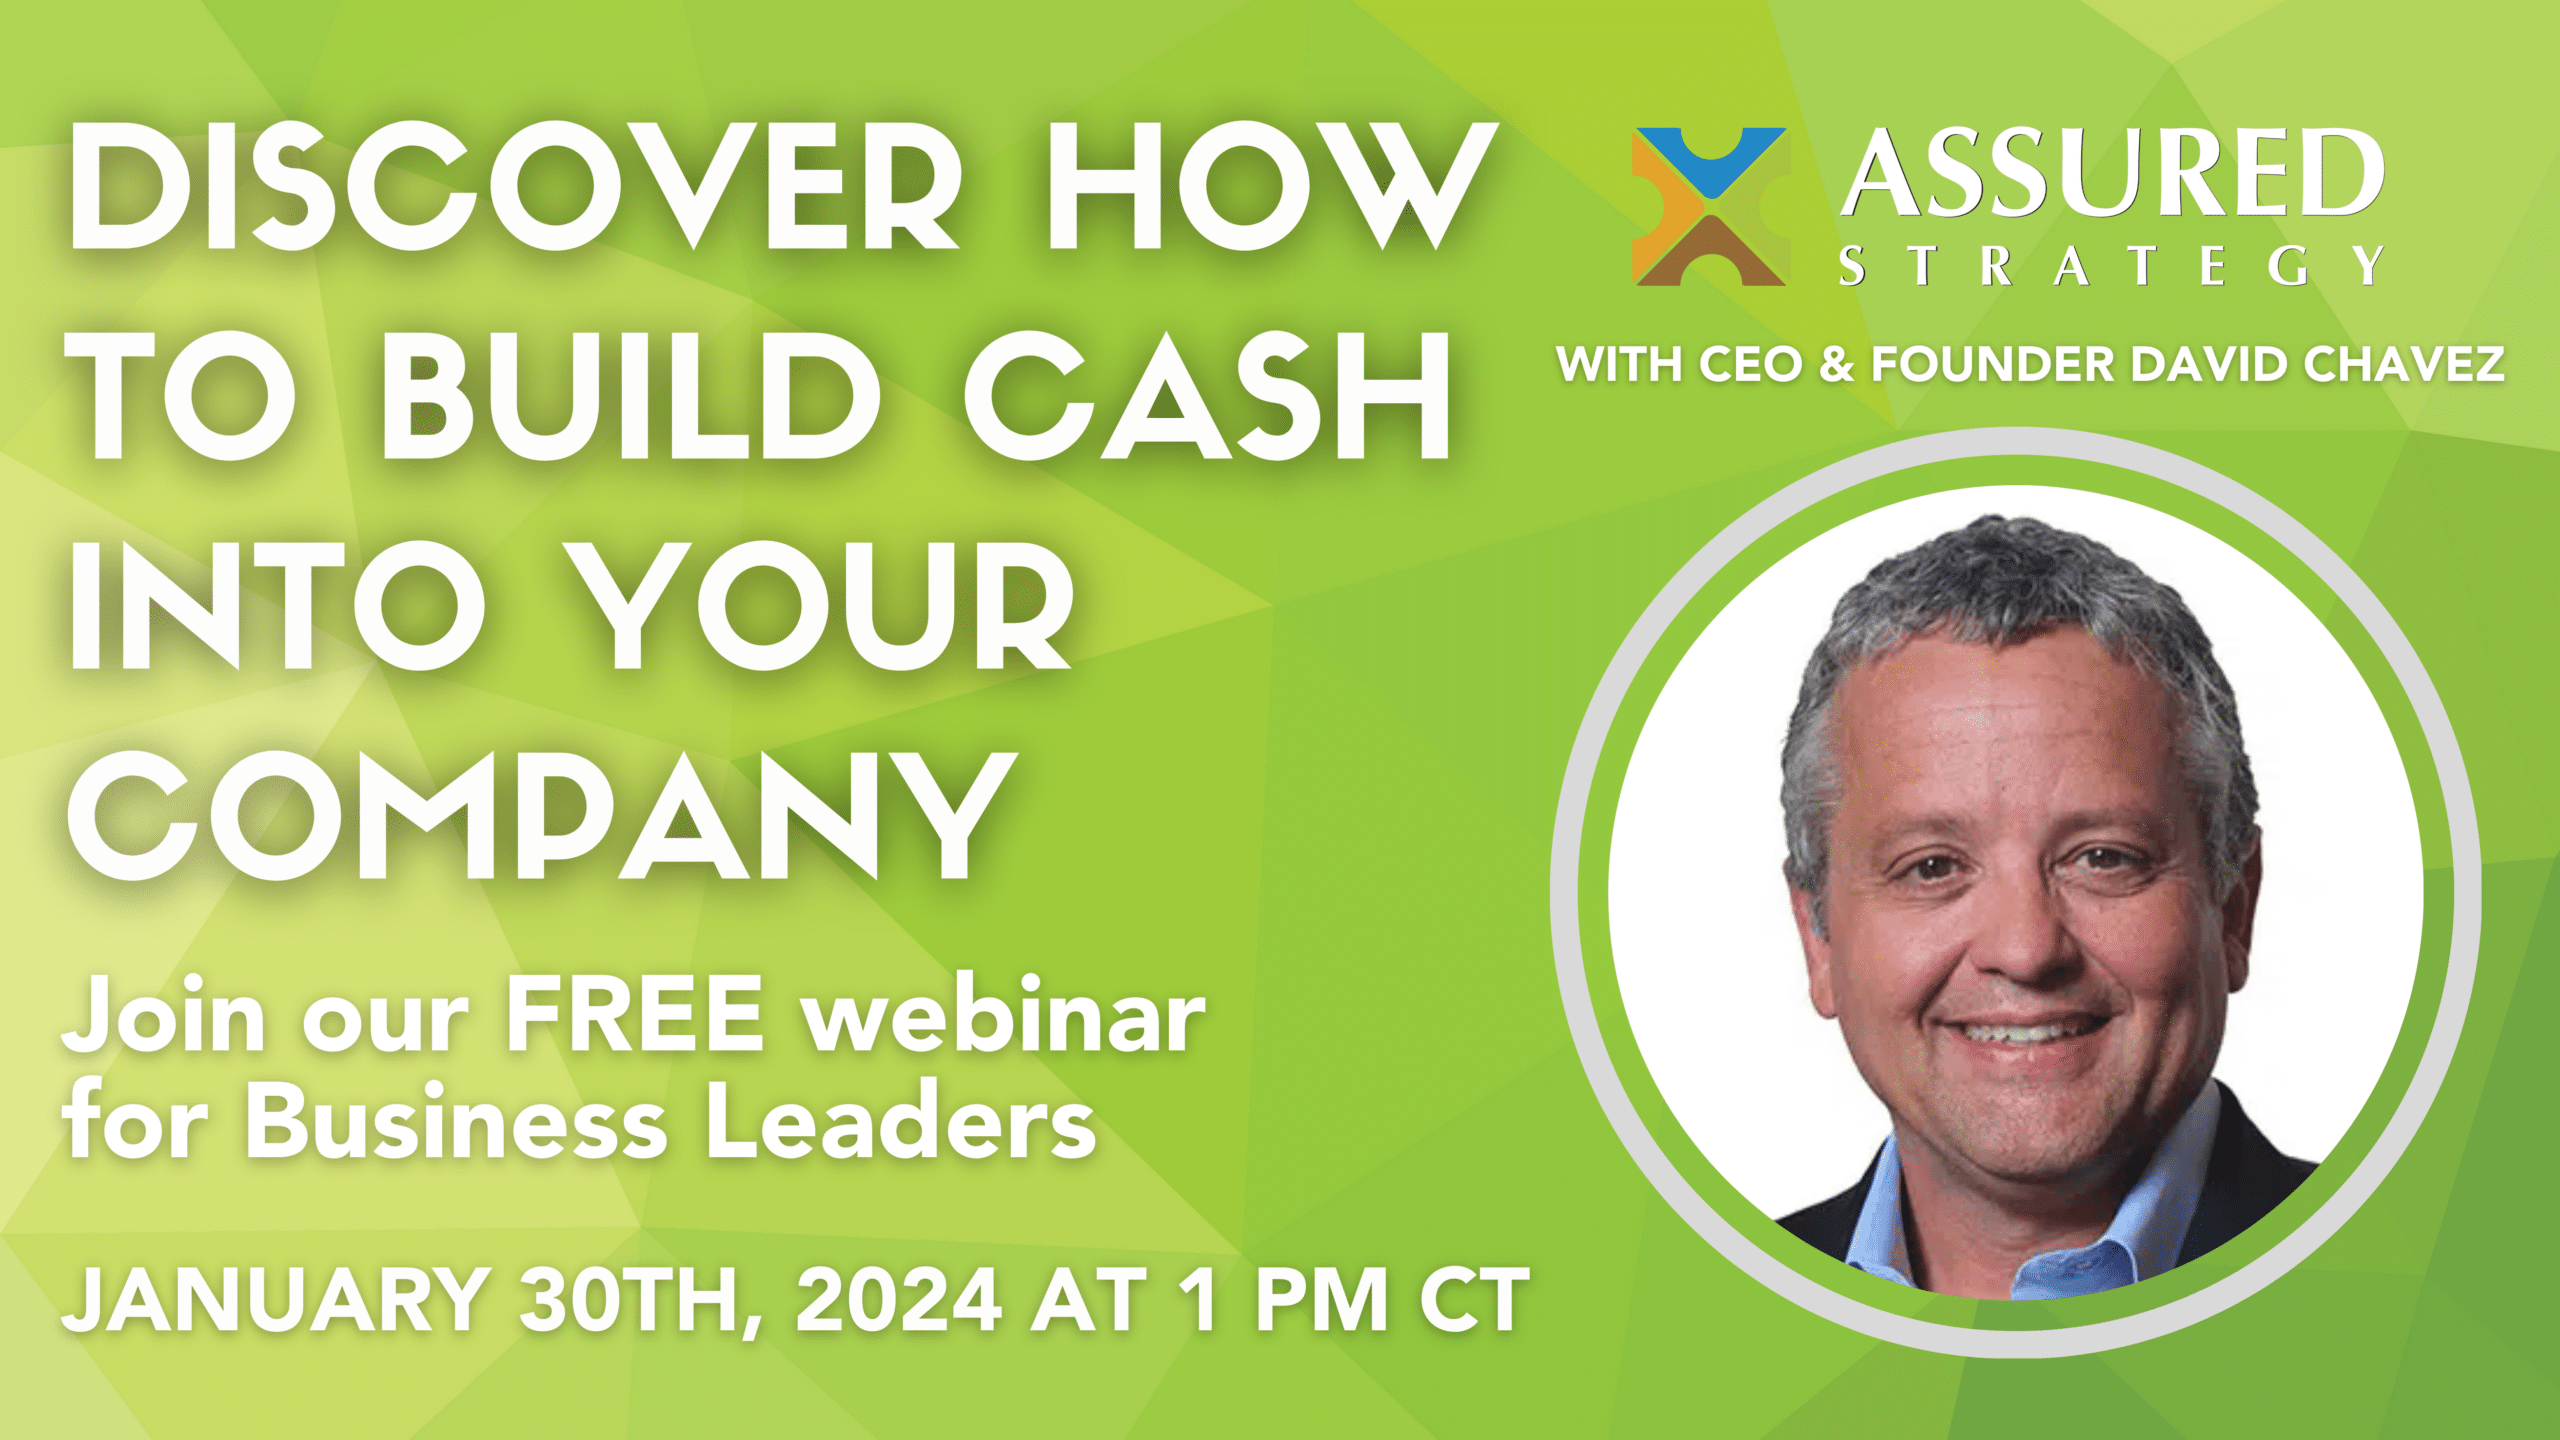 Free Webinar: Why Your Employees Think You Make Wheelbarrows of Money: A Look Into Building Cash in Your Company – January 30th from 1-2pm CT